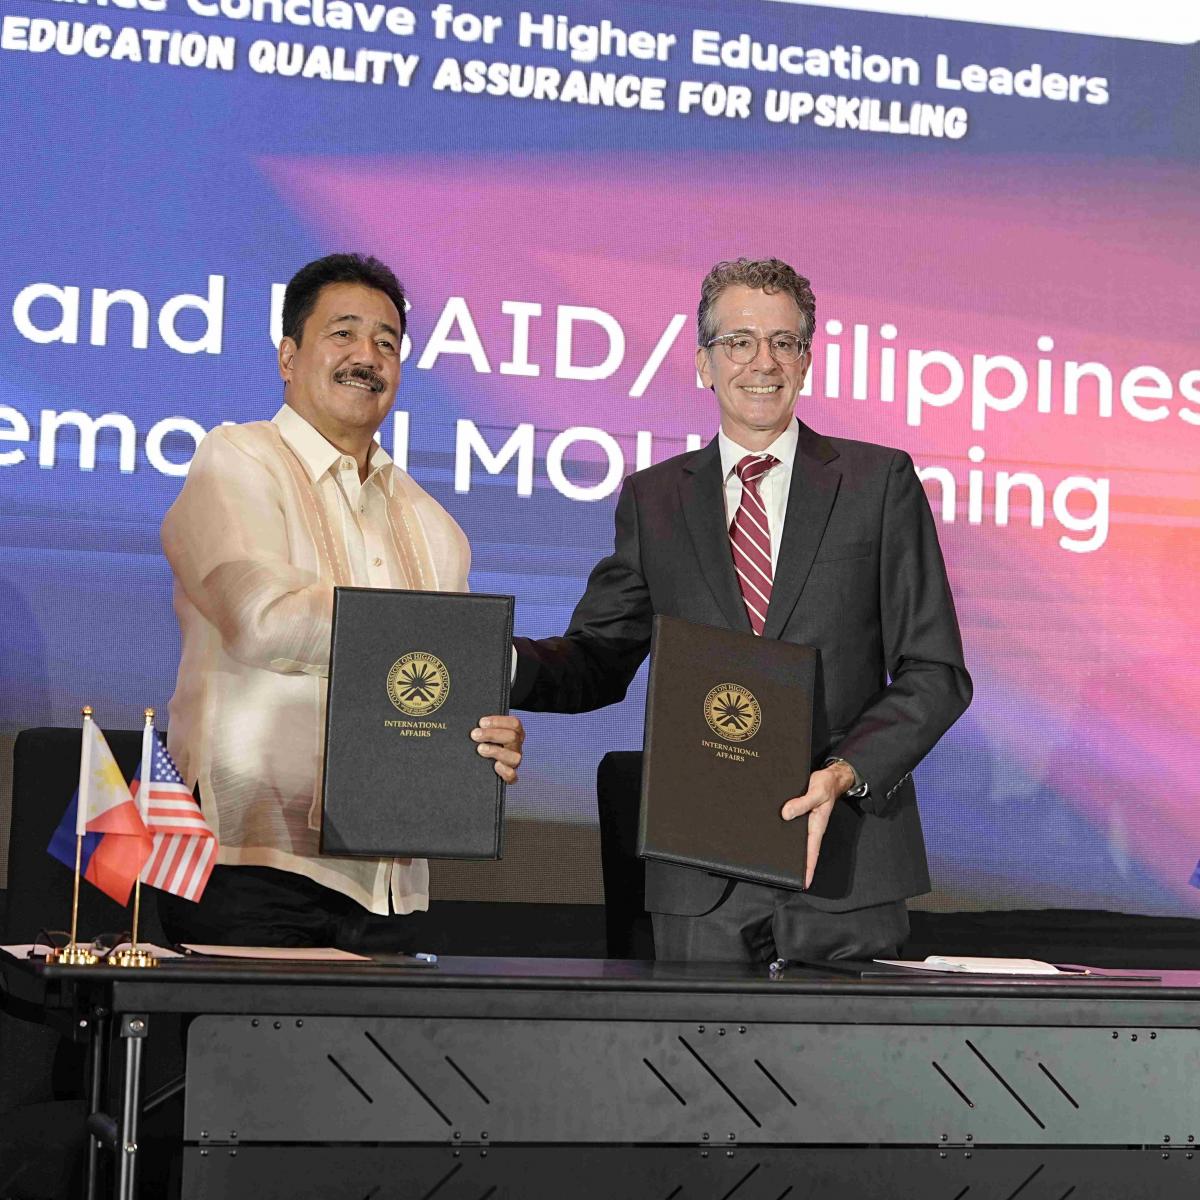 U.S., Philippines Launch New Fellowship Program for Higher Education Officials